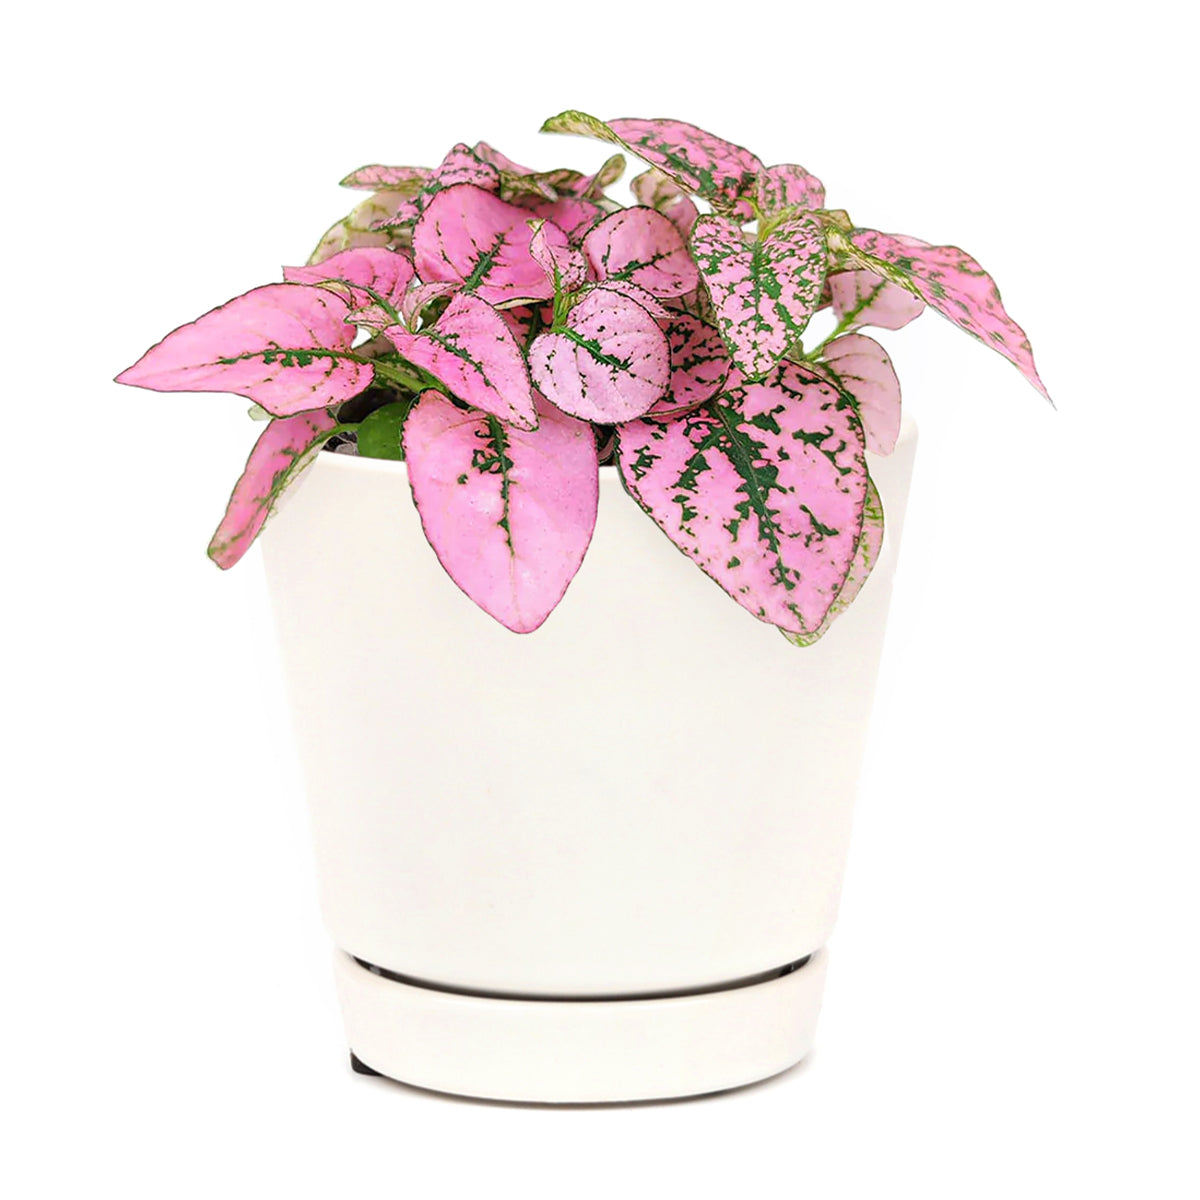 hypoestes pink plant, pink hypoestes care, how to take care of pink polka dot plant, pink polka dot plant outdoors, pink polka dot splash plant, hypoestes 'pink', hypoestes pink splash care